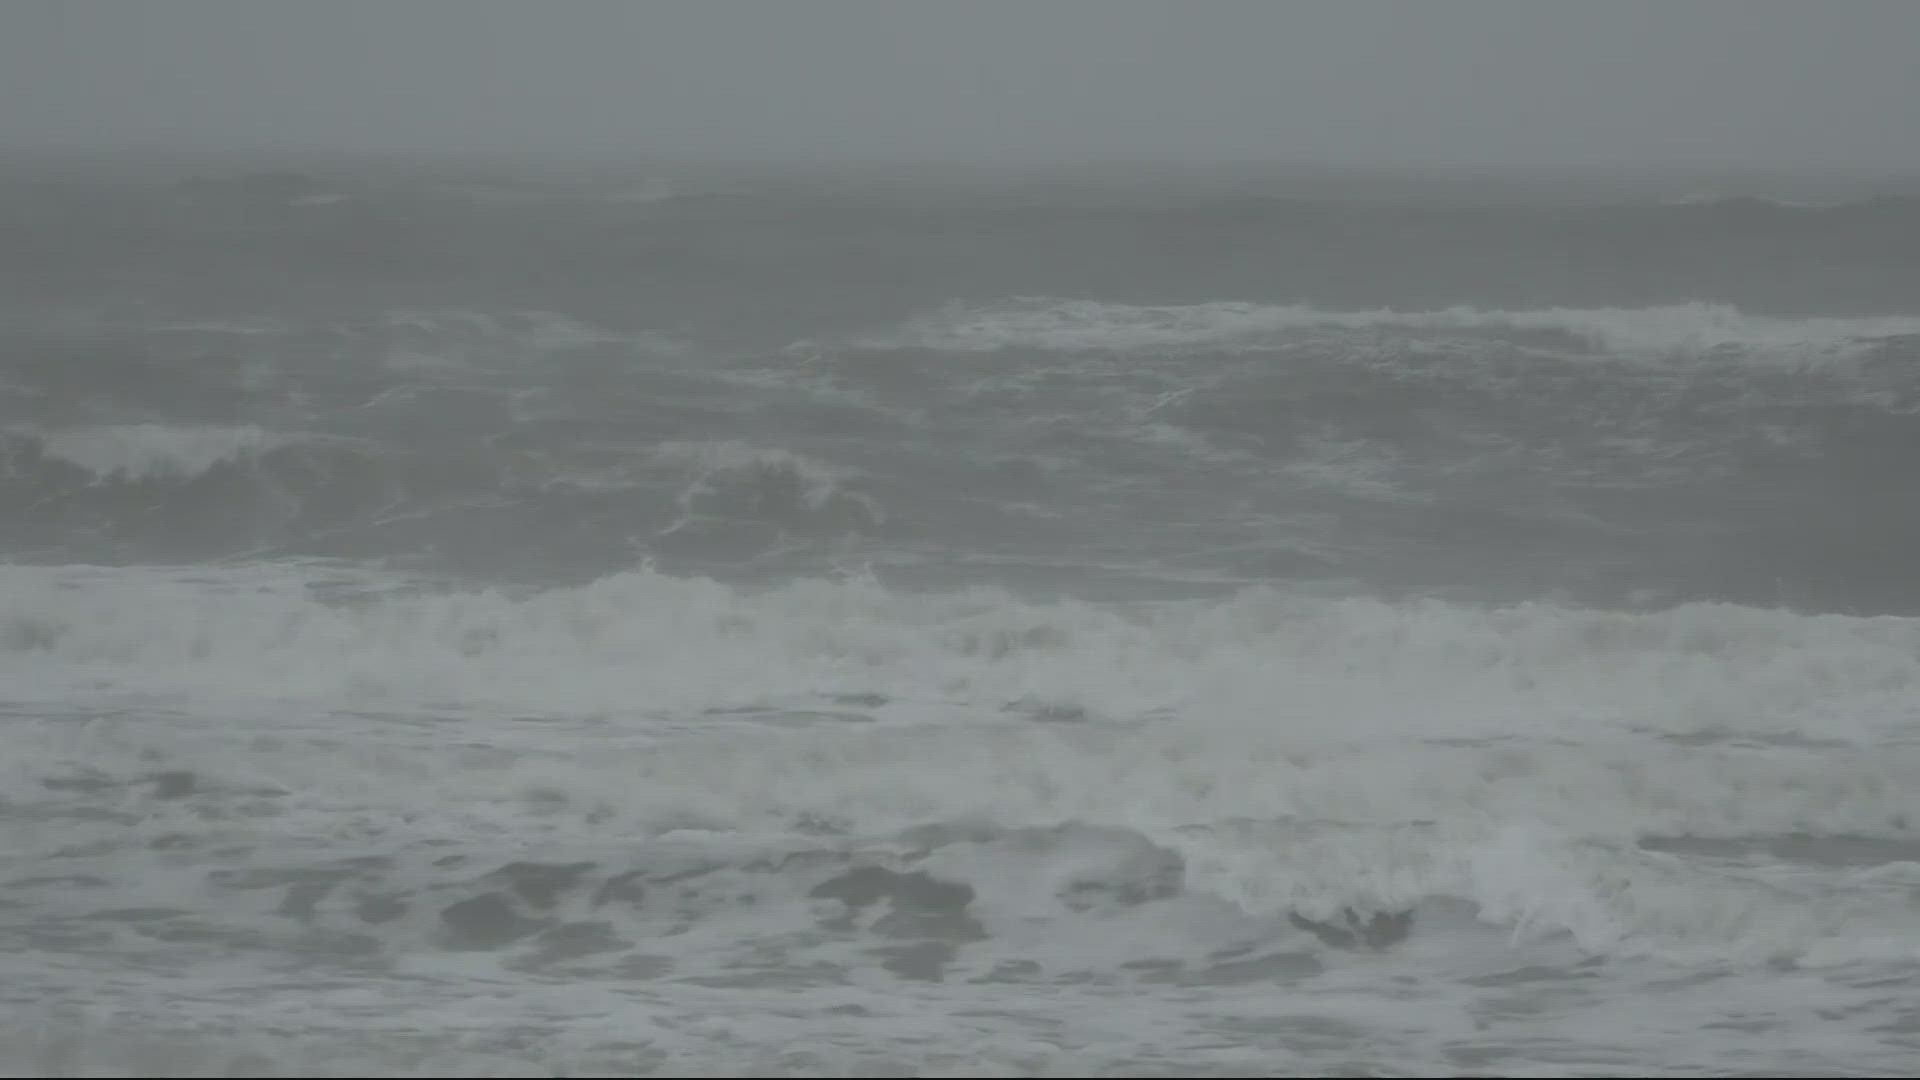 The First Coast is experiencing a Nor'easter on Easter. Jacksonville Beach Ocean Rescue says the beaches will have large and dangerous surf the next few days.